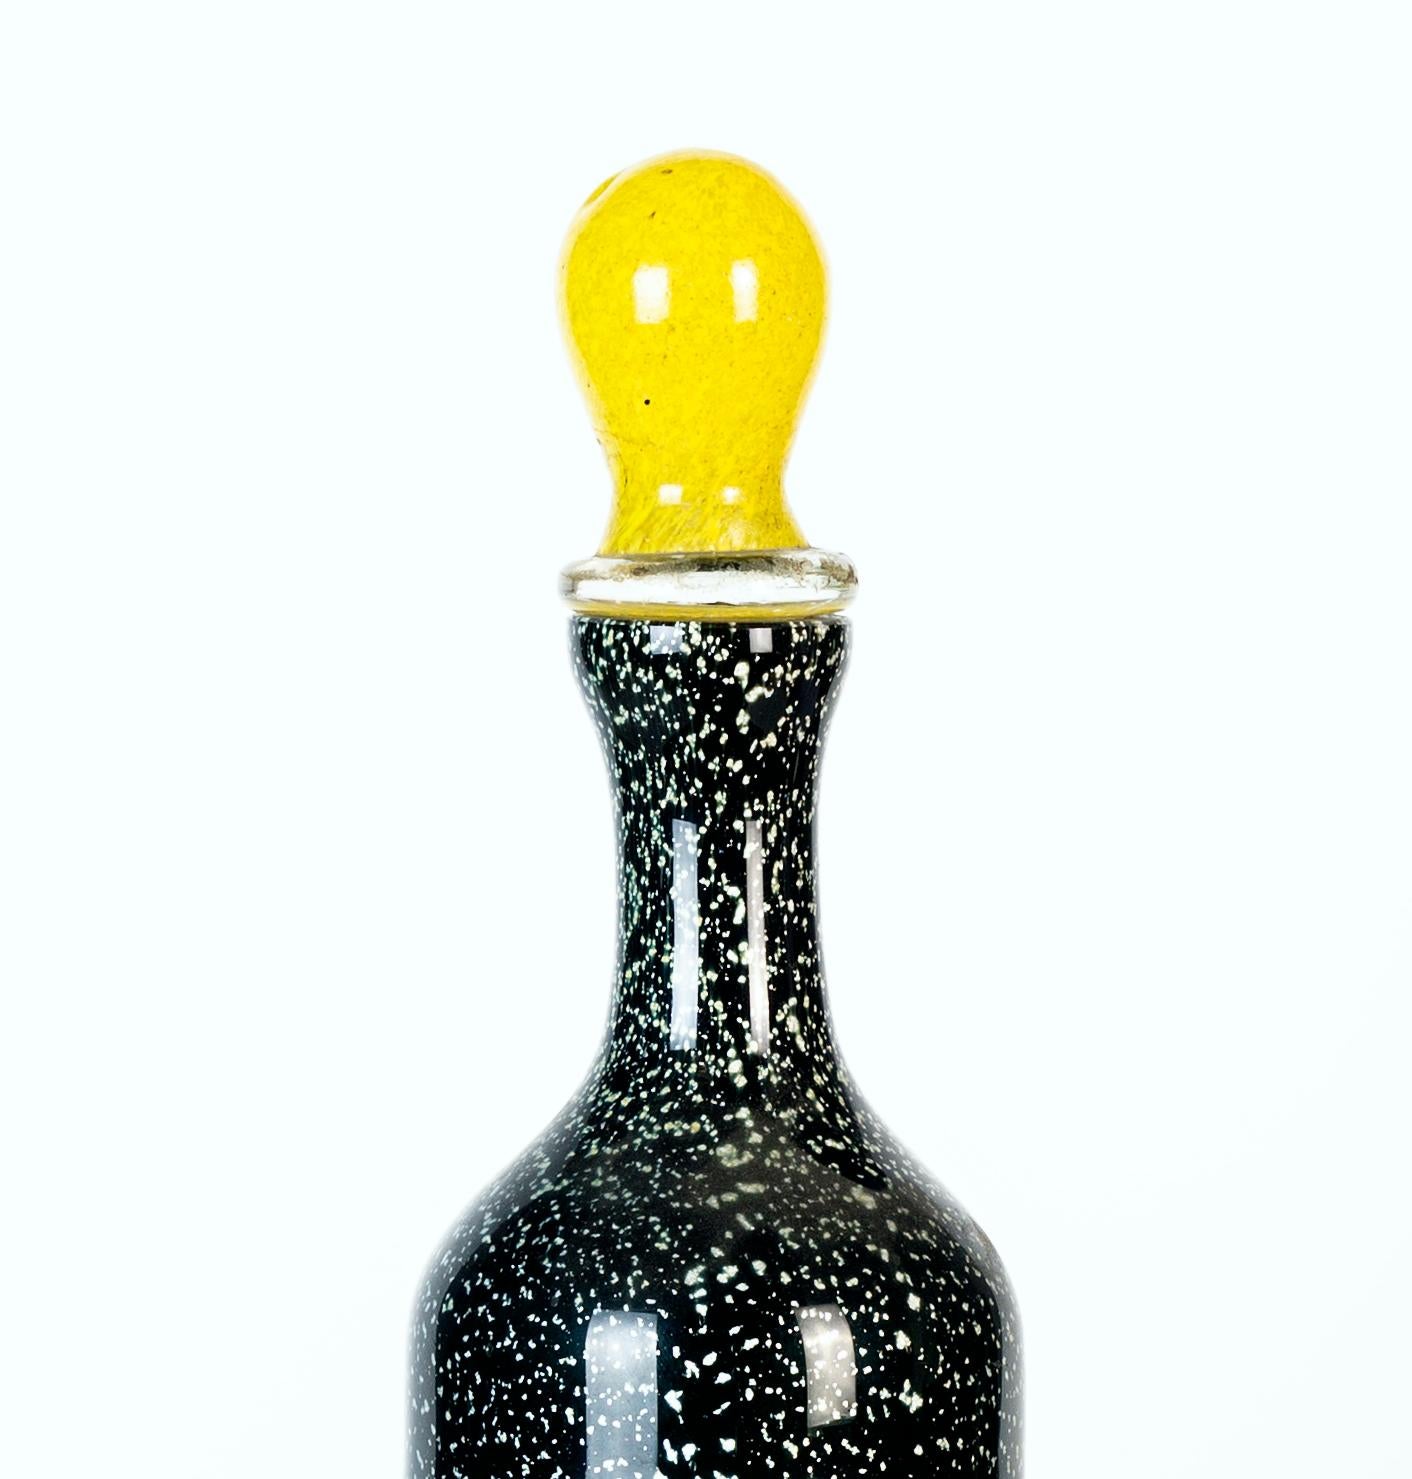 Black and white spotted bottle is a beautiful glass decorative object, realized by Murano manufacture during the 1970s and designed by Jean Mell.

This decorative object is a very elegant glass black and white spotted bottle with yellow